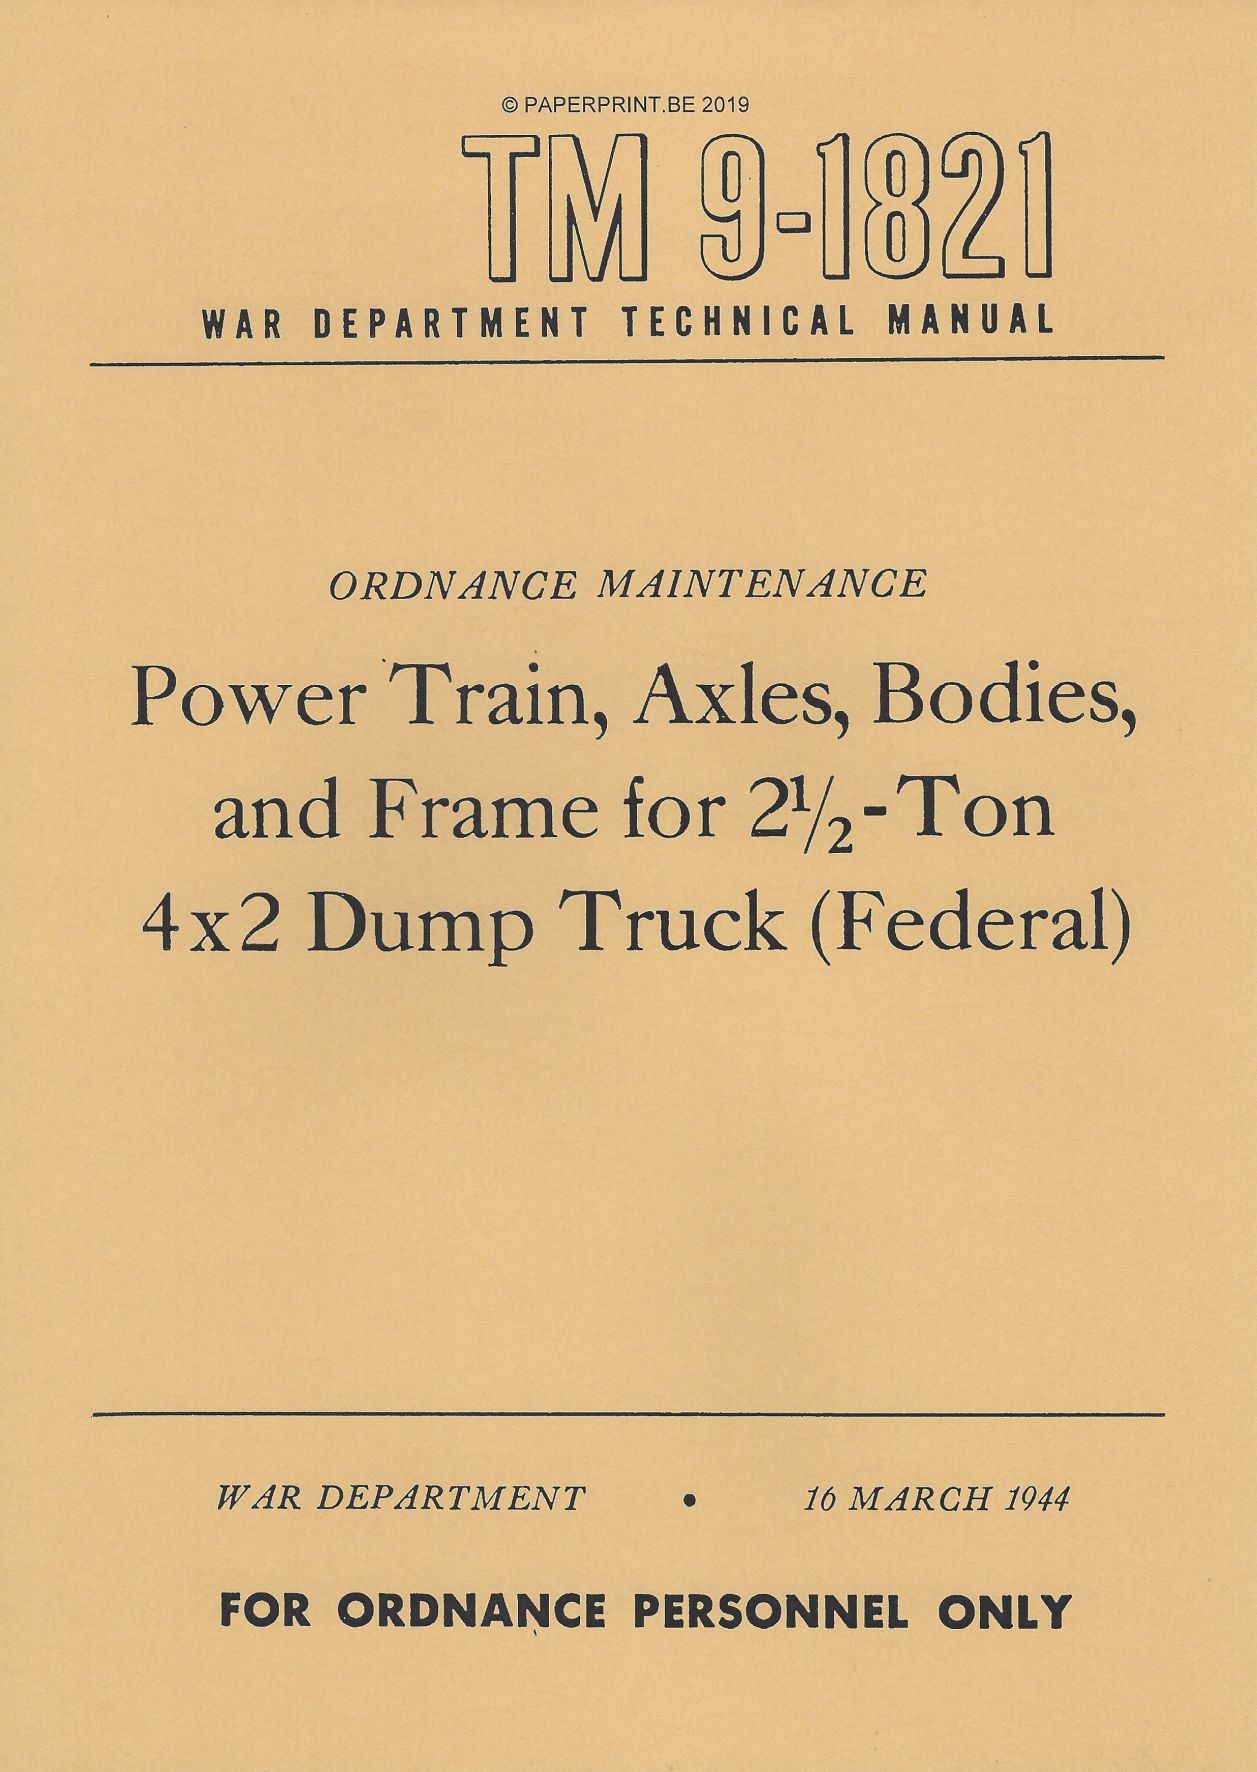 TM 9-1821 US POWER TRAIN, AXLES, BODIES AND FRAME FOR FEDERAL 2 ½ TON 4x2 DUMP TRUCK